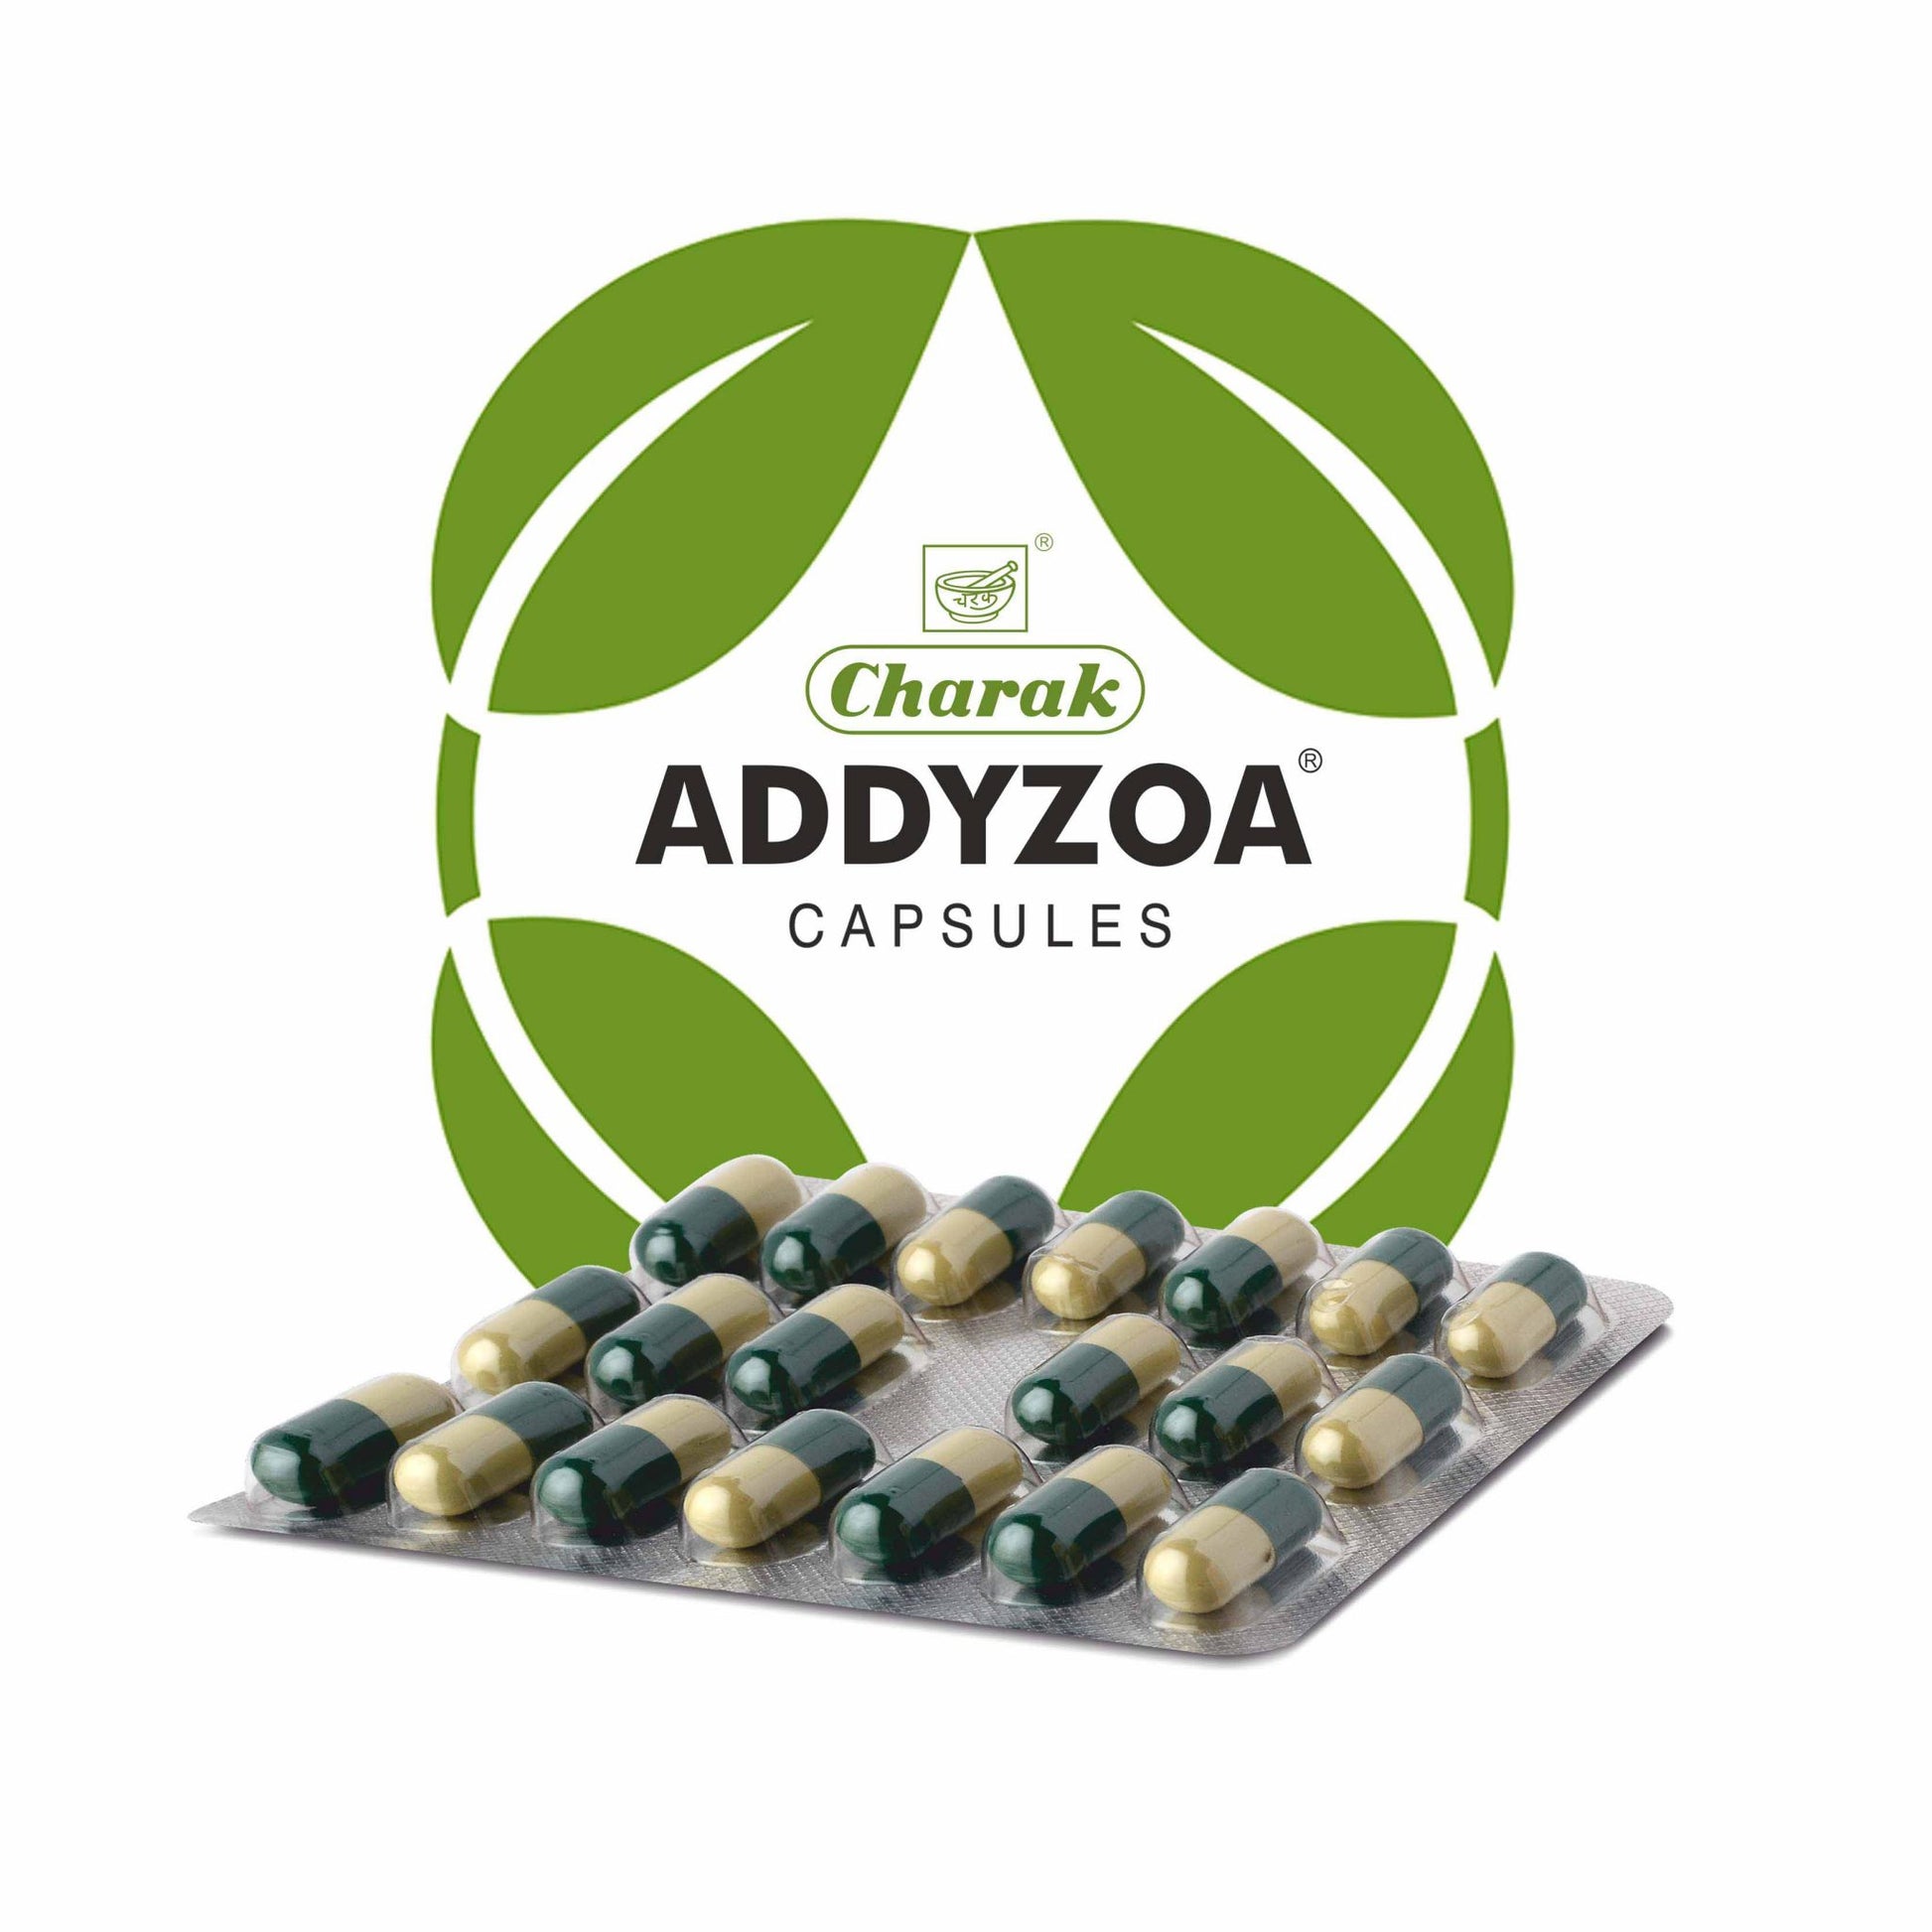 Shop Charak Addyzoa 20Capsules at price 185.00 from Charak Online - Ayush Care